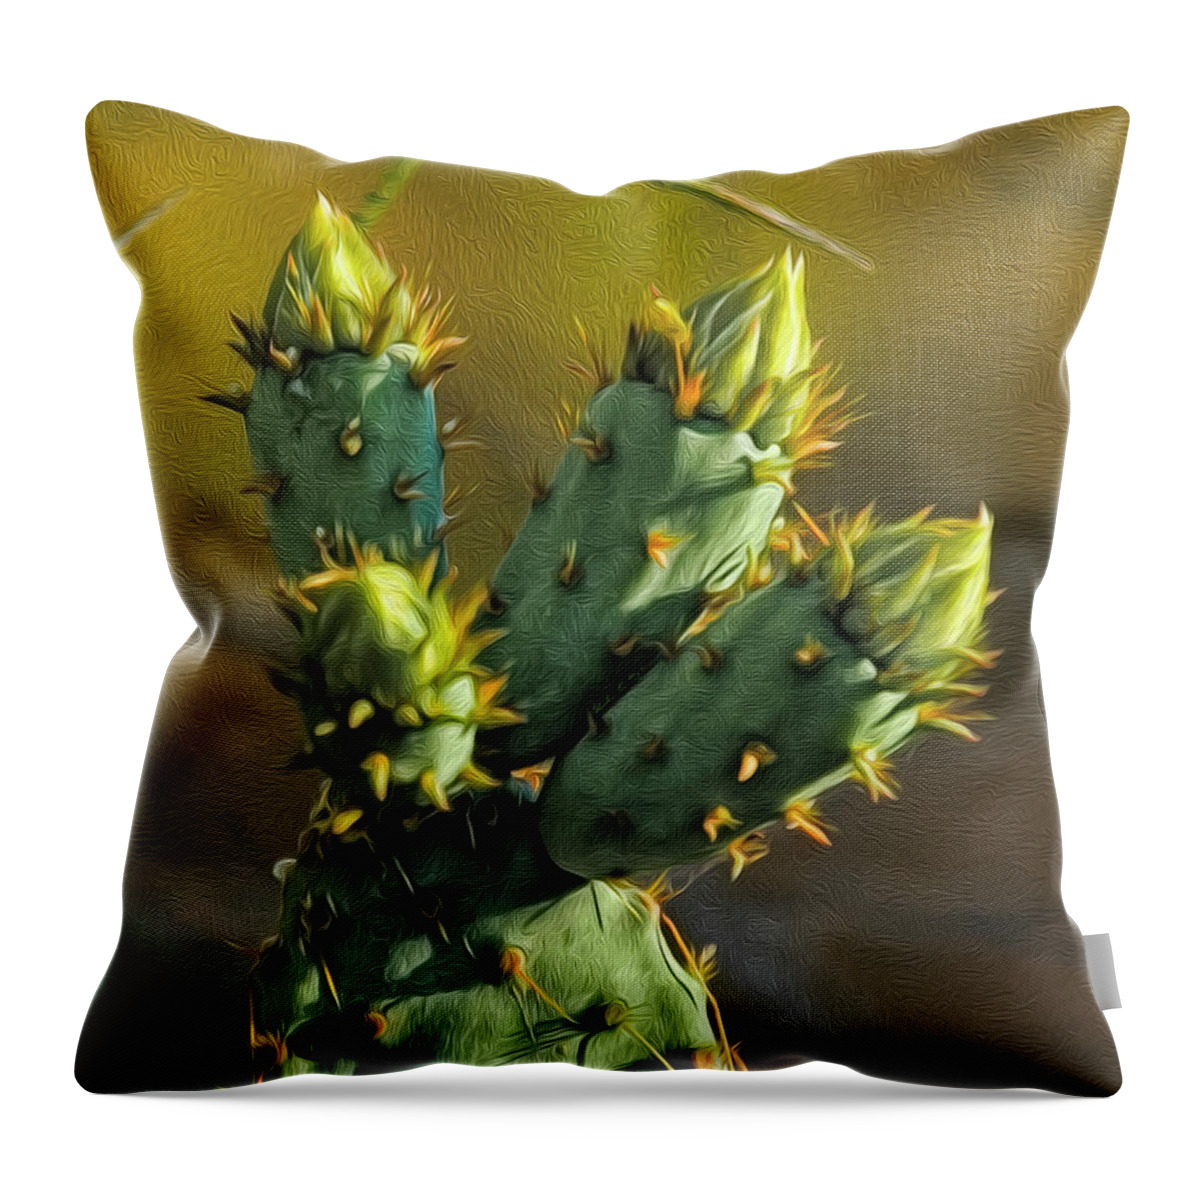 Arizona Throw Pillow featuring the photograph Cactus Buds op52 by Mark Myhaver